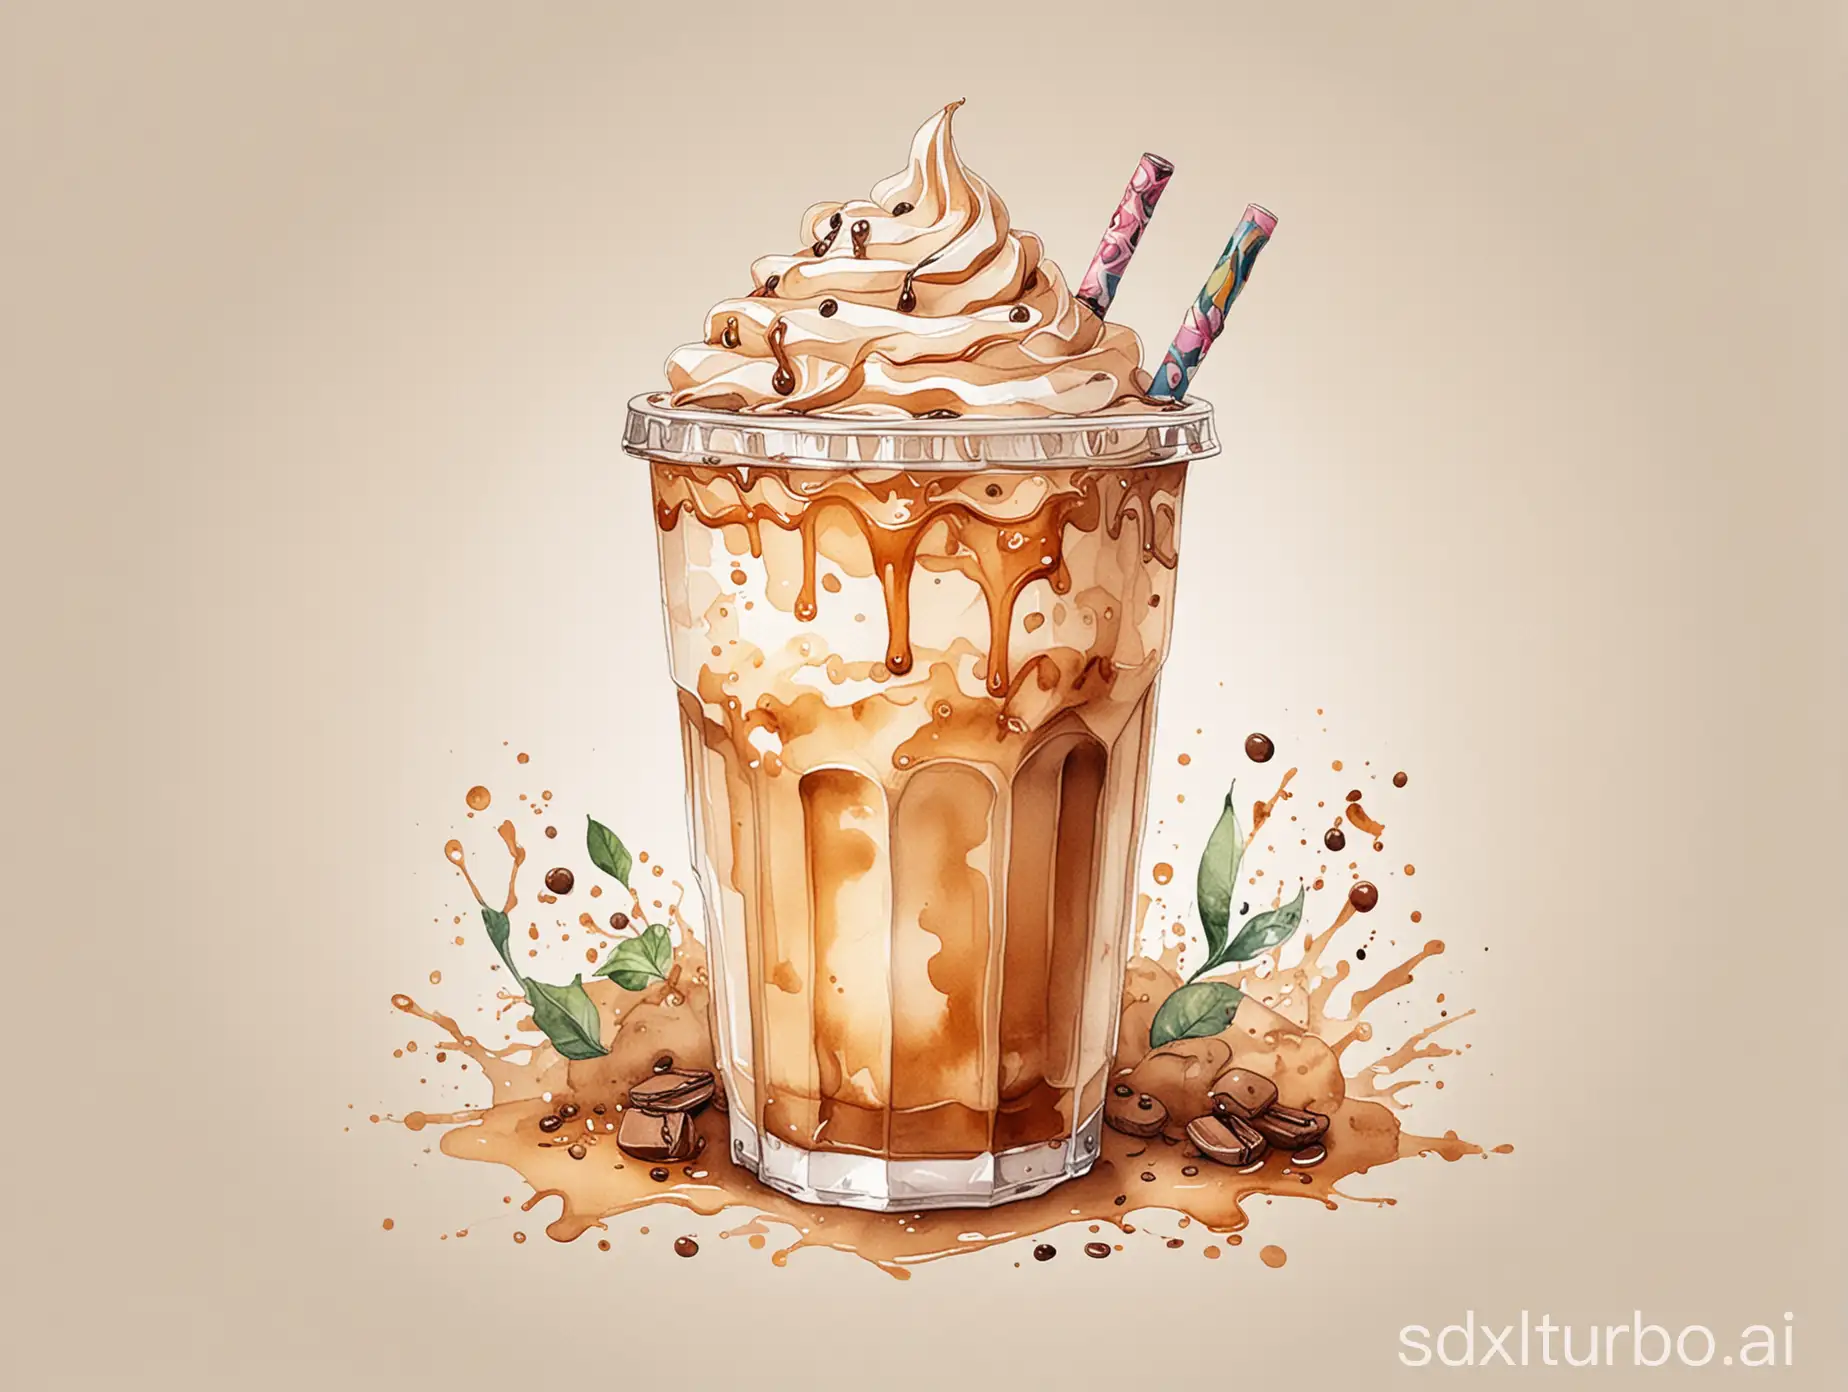 Whimsical-Watercolor-Vector-Illustration-of-Iced-Coffee-on-White-Background